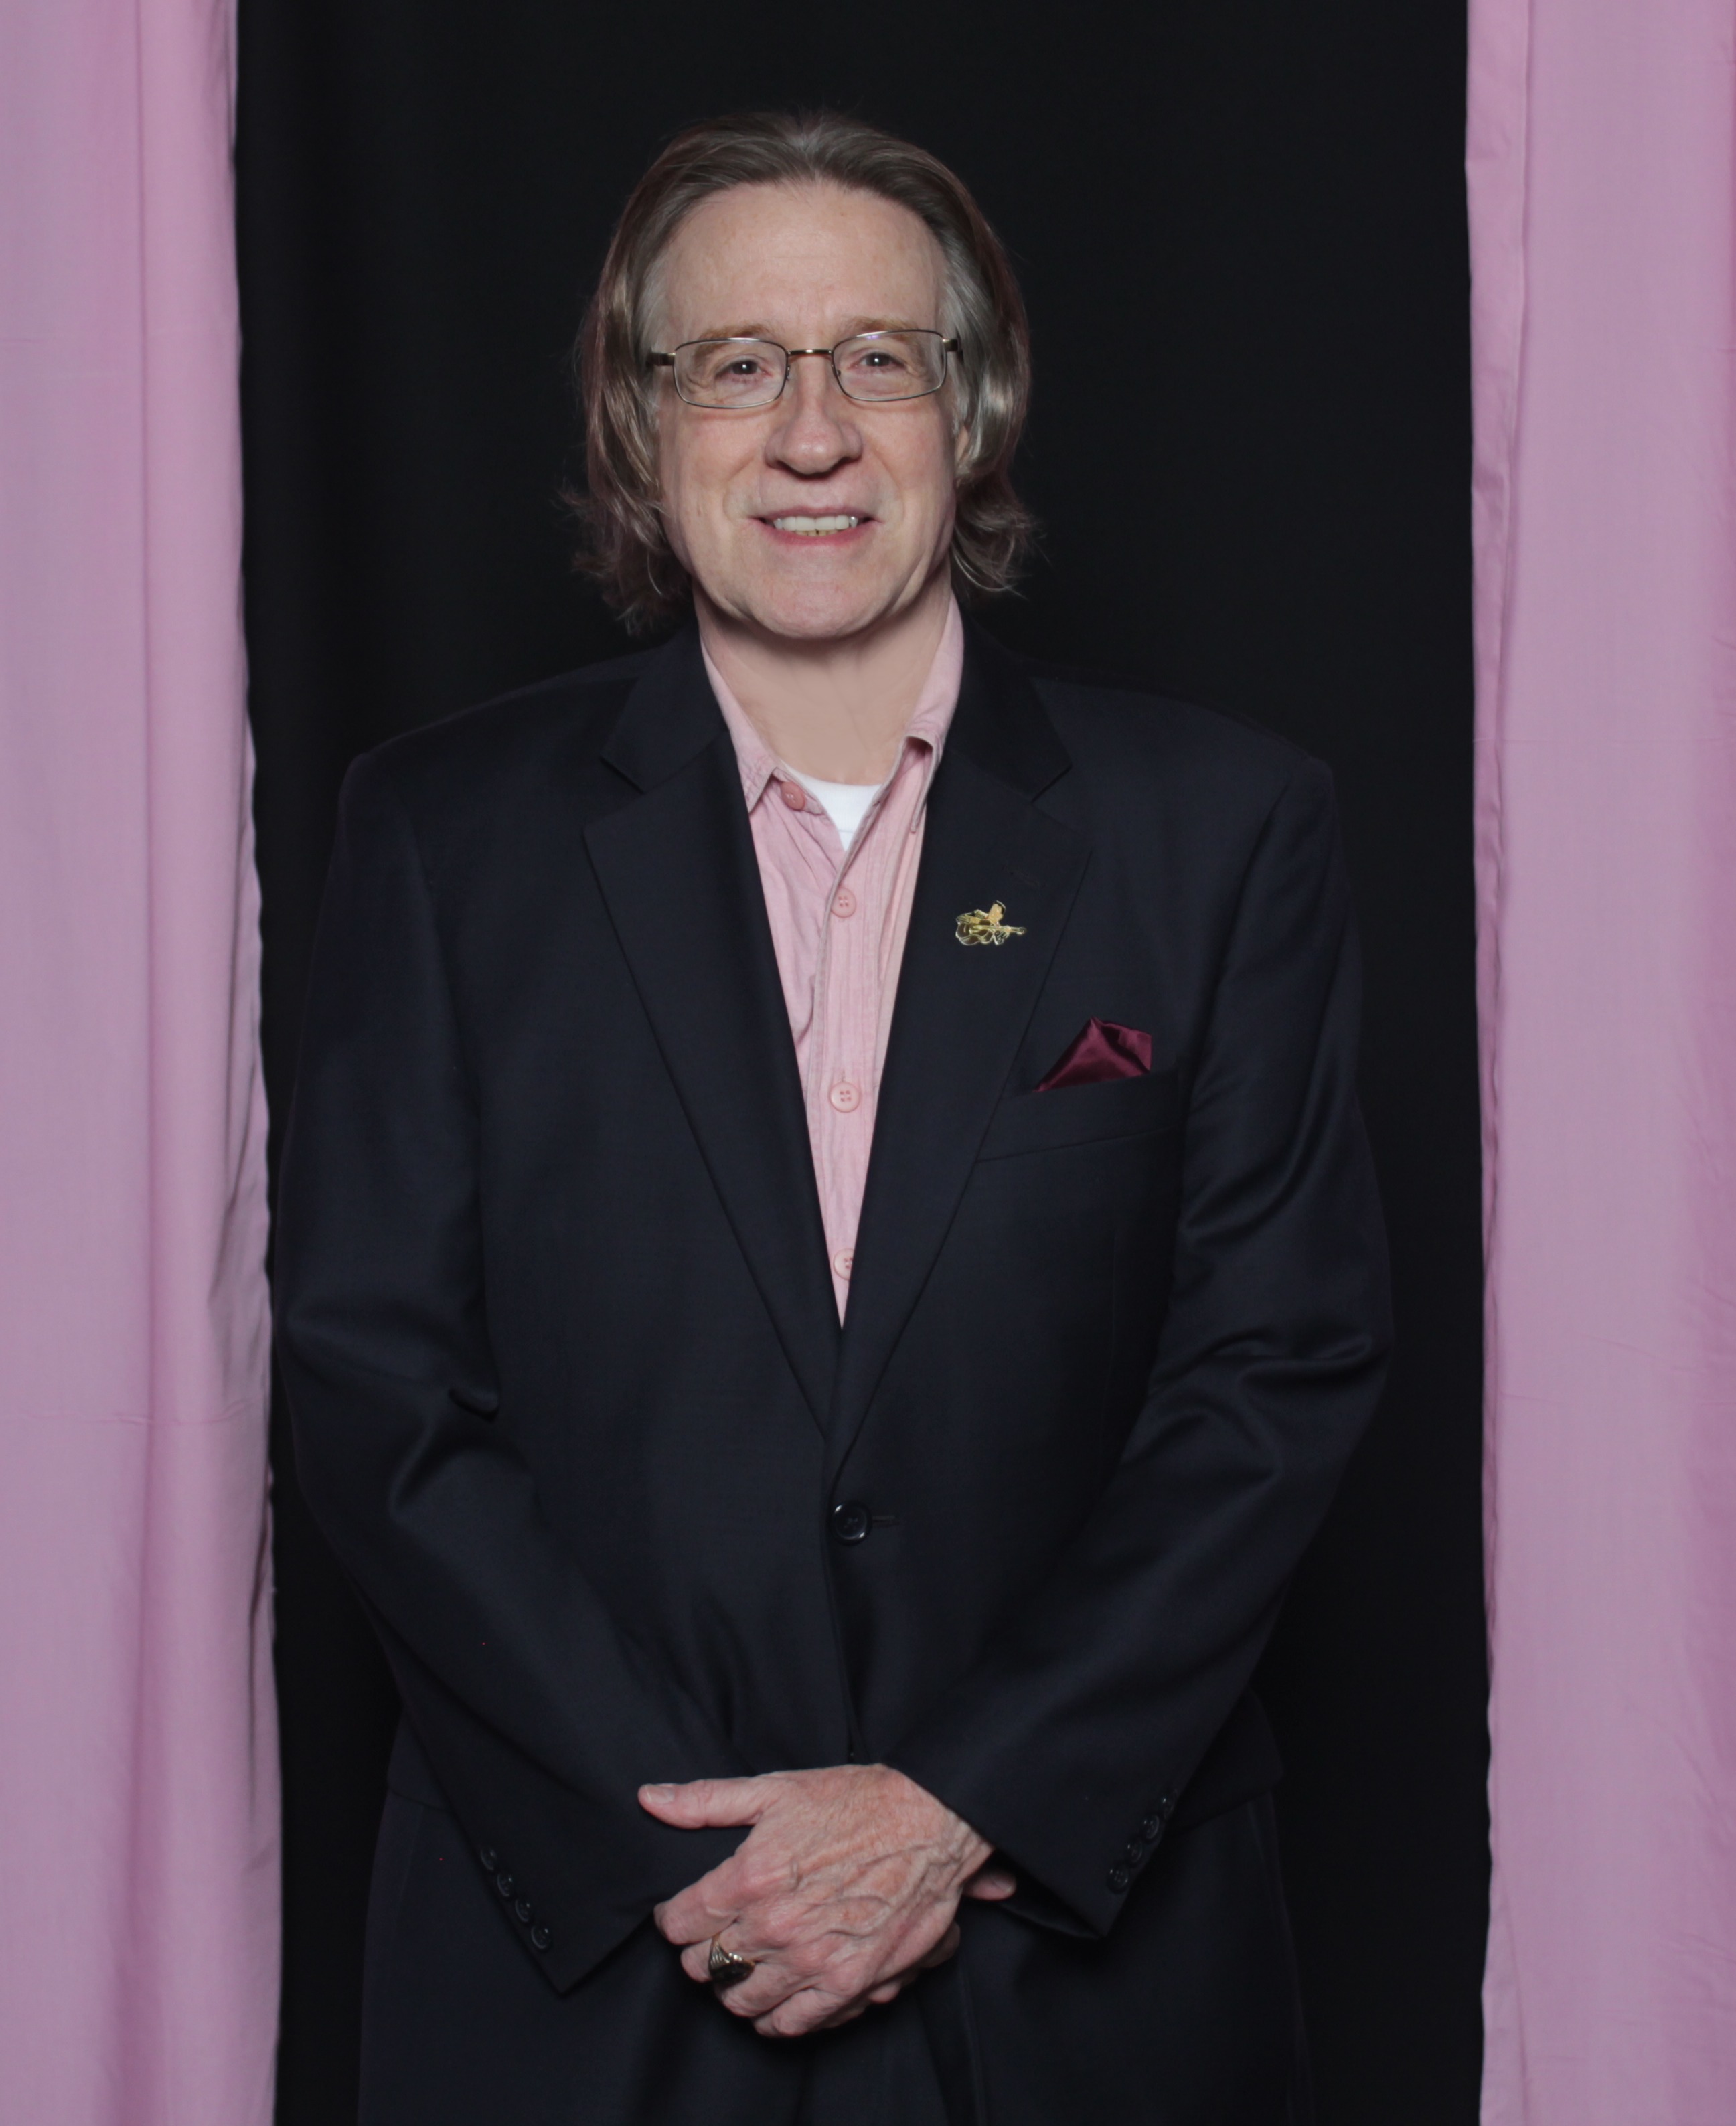 Pink shirt and Elvis lapel pin, during 'Celebrity Bartenders for Moms on the Run' fundraiser to fight breast cancer October 24, 2015.